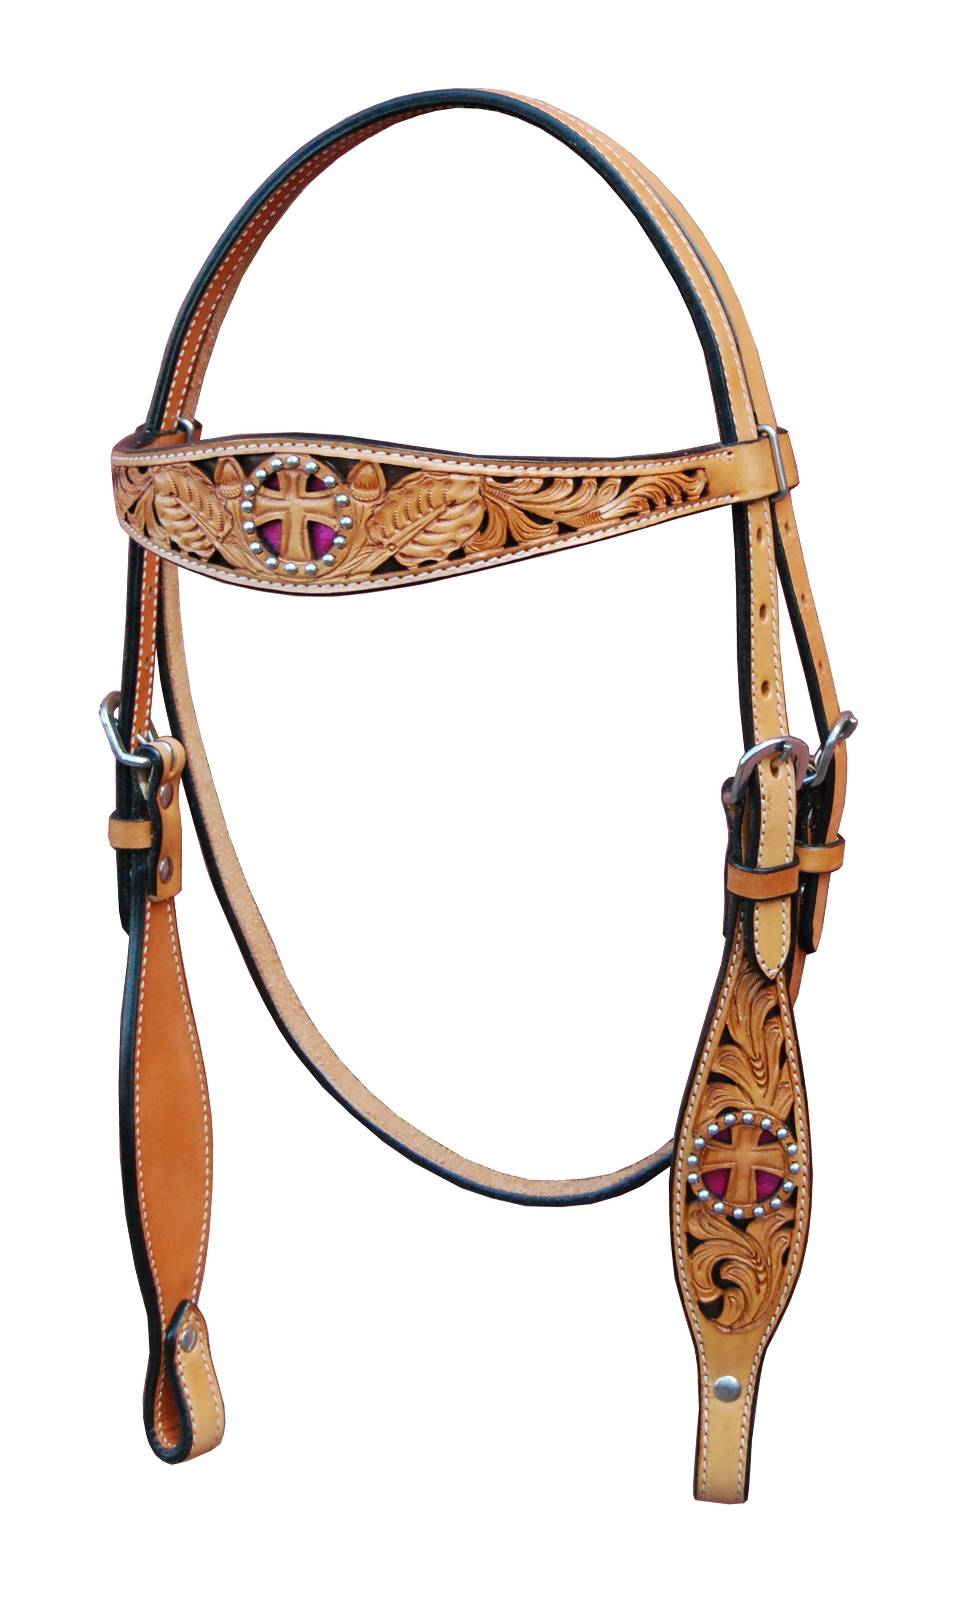 468921PINK HRSE Turn-Two Browband Headstall - St. Christopher sku 468921PINK HRSE